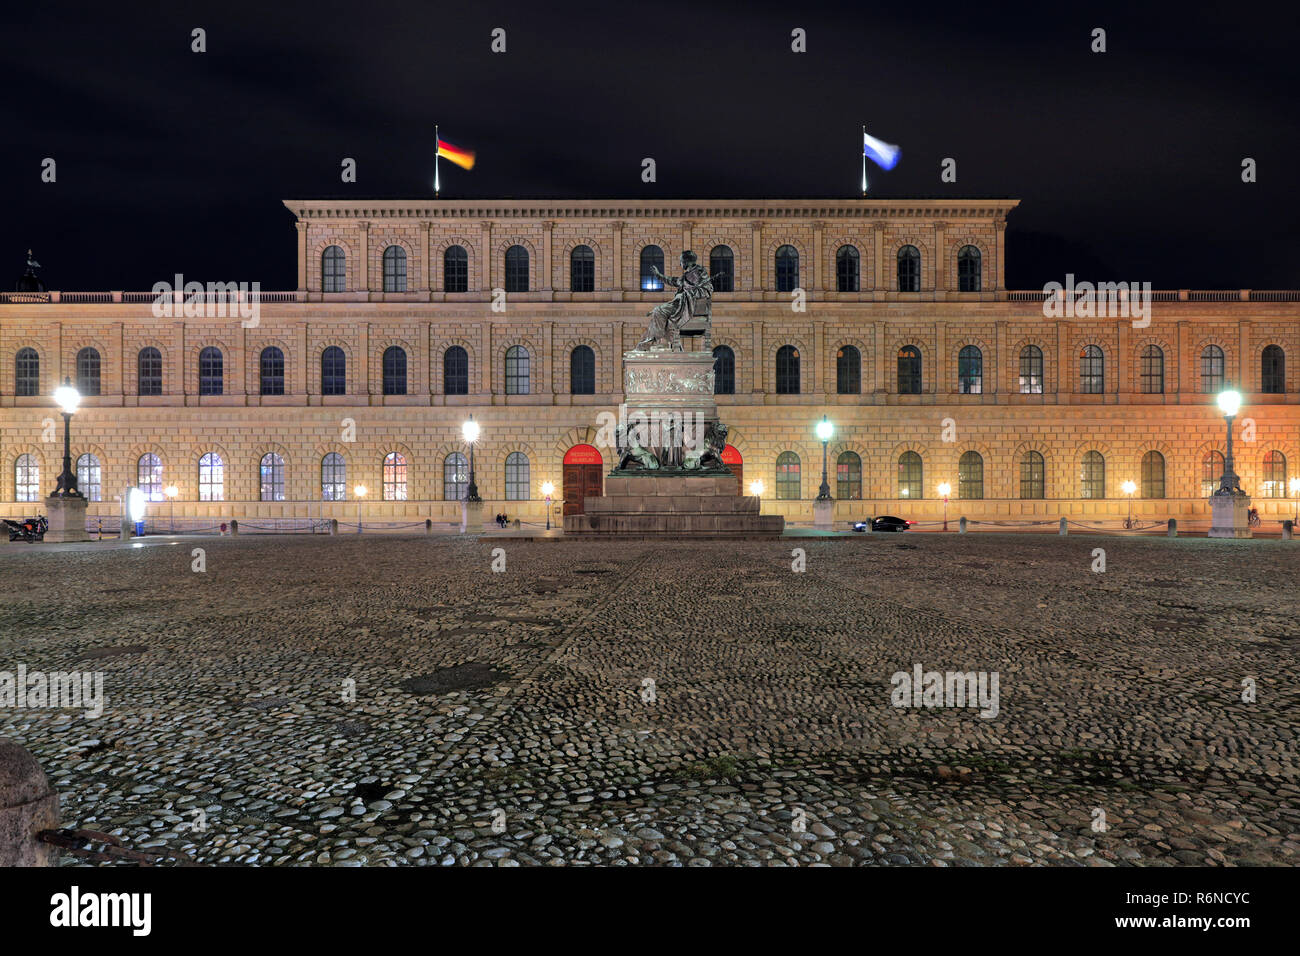 the residence at max joseph platz with a monument of king maximilian at night in munich Stock Photo